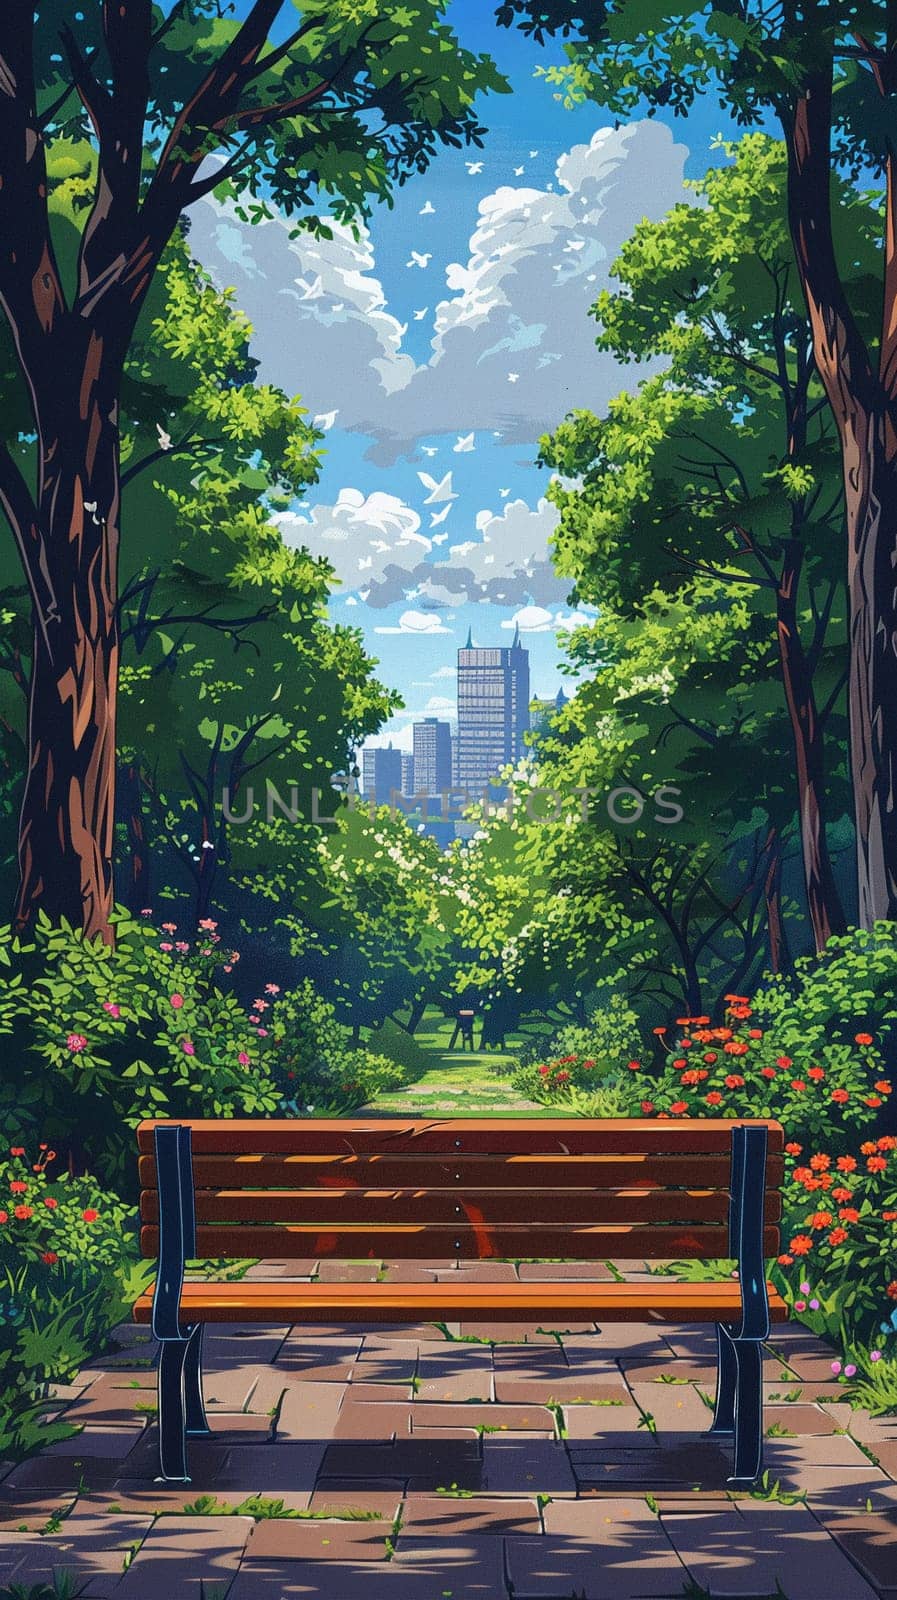 City bench moment depicted in minimalistic style, with flat colors and clean lines.